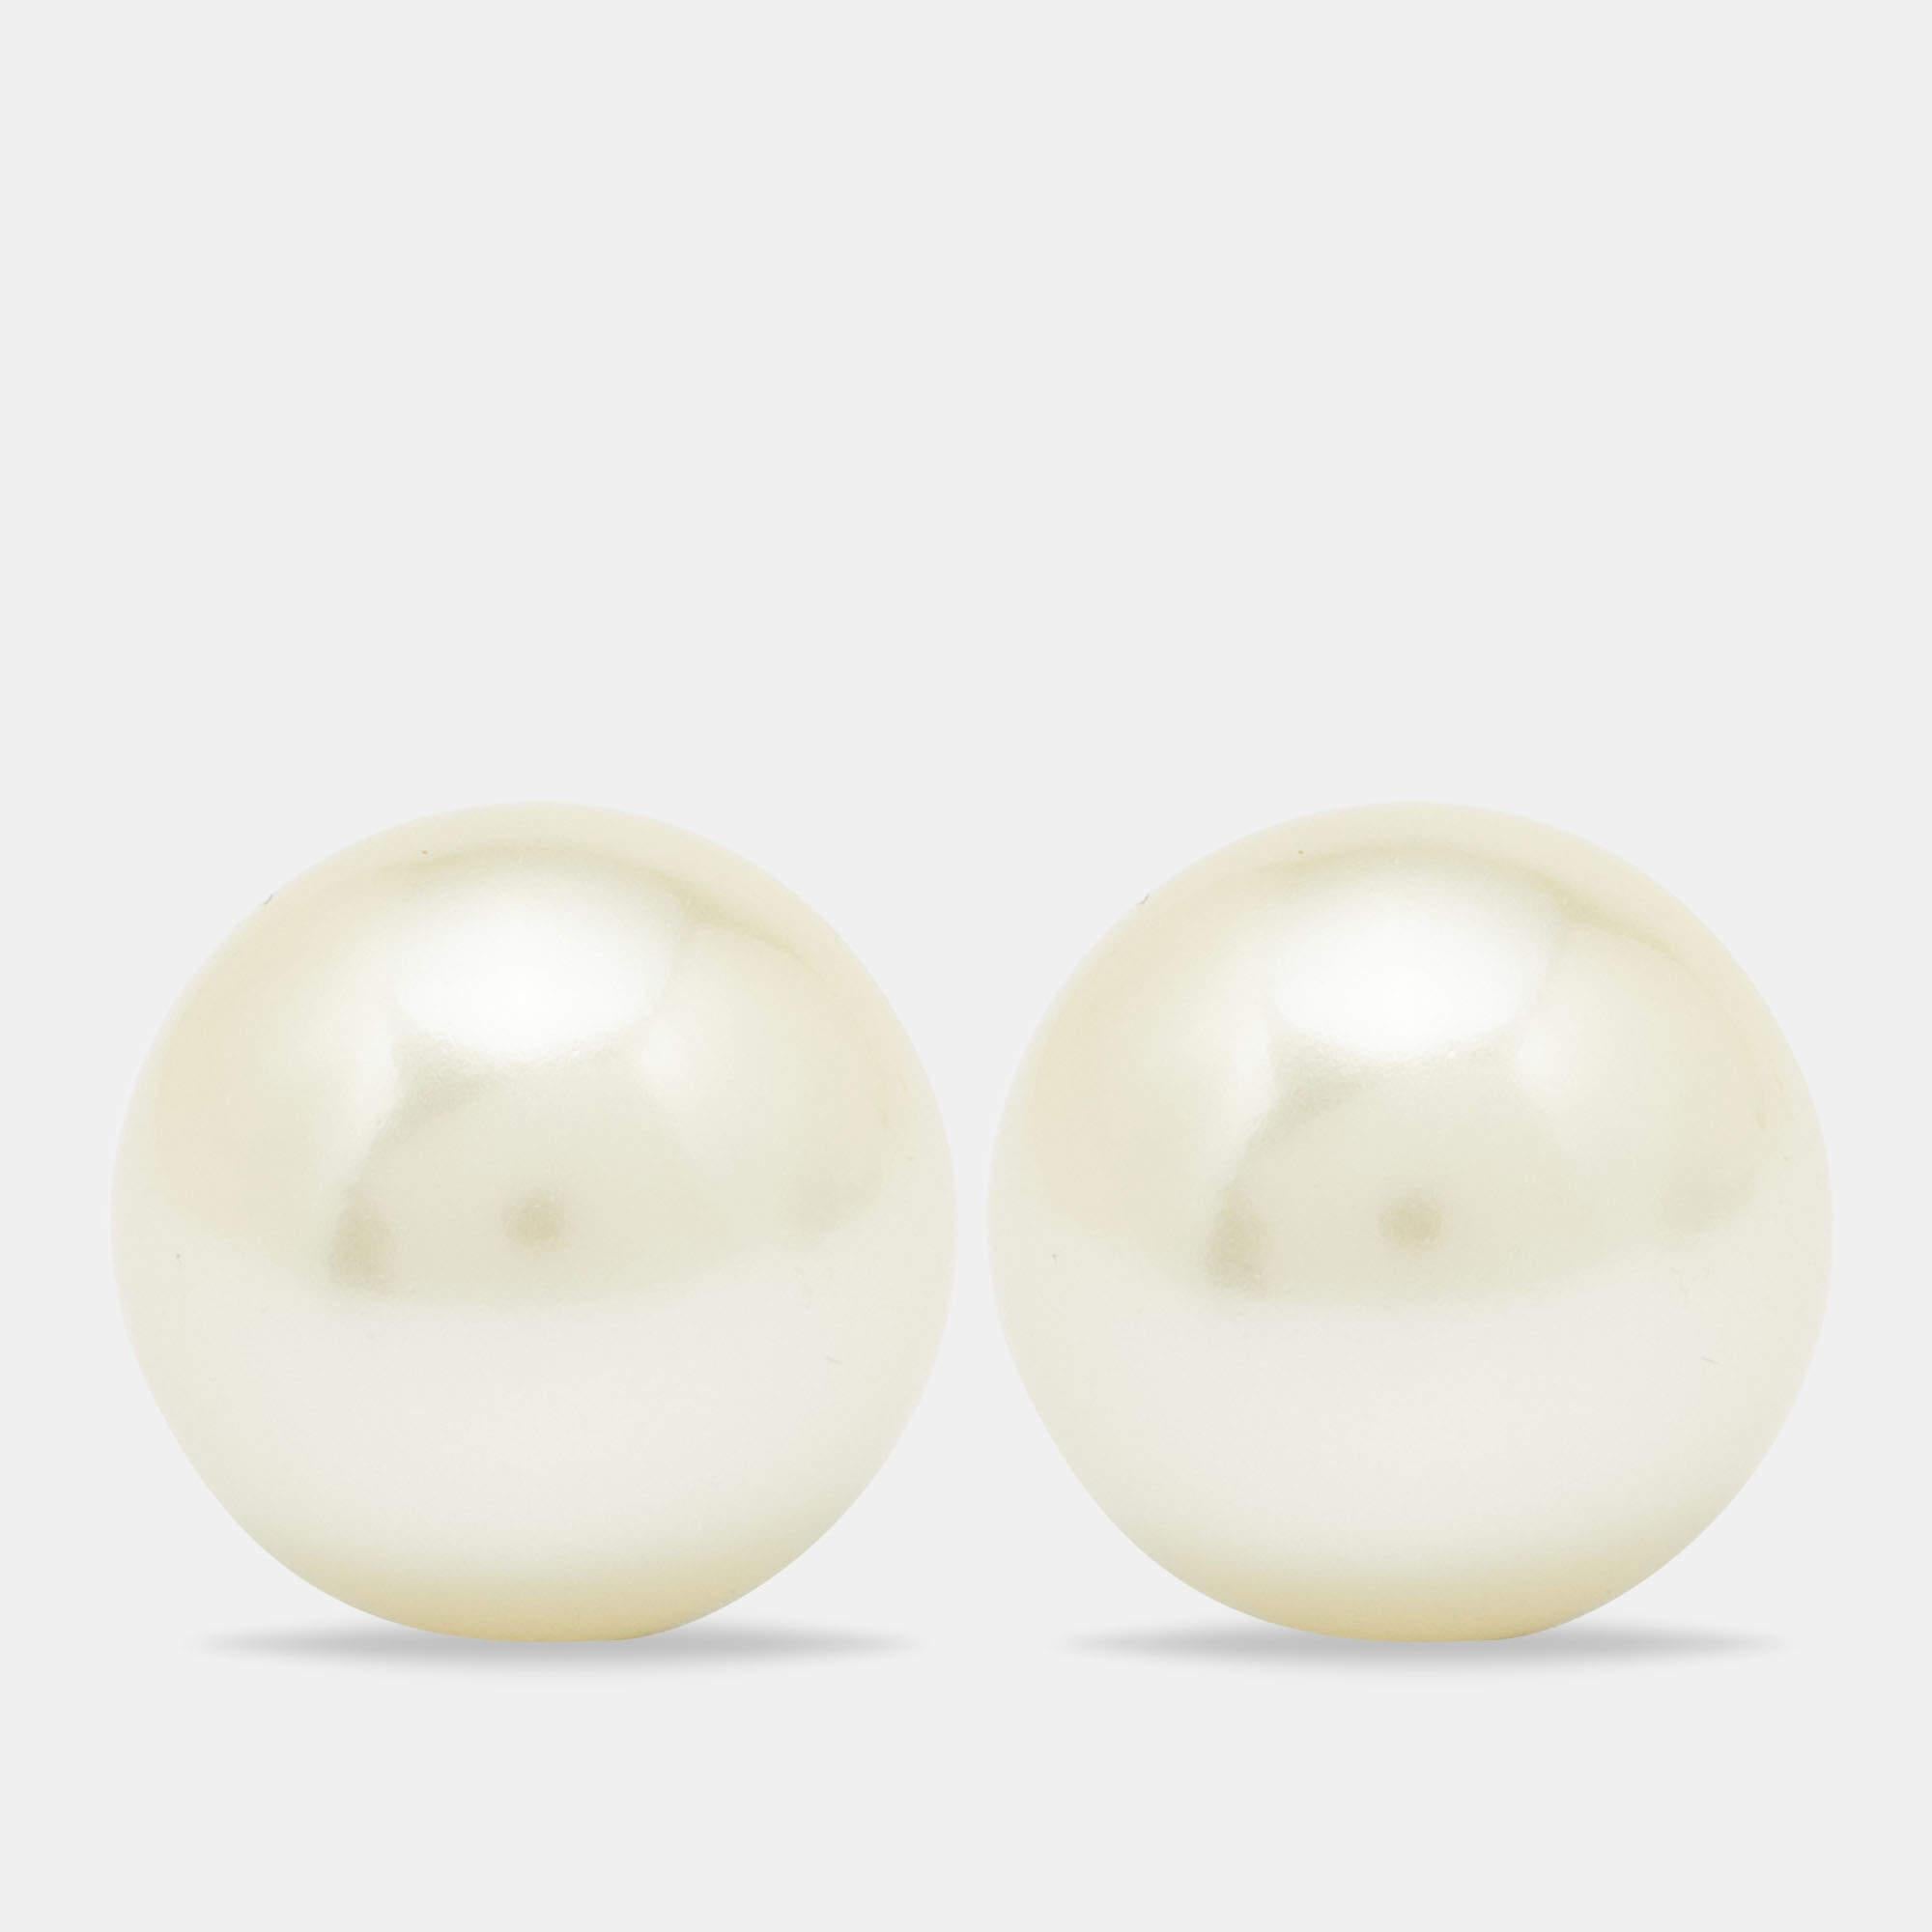 A gold-tone bee motif on the front and a large faux pearl at the back that peeks out from behind the lobe, this Dior Mise En Dior Tribal pair of earrings will spark joy again and again.

